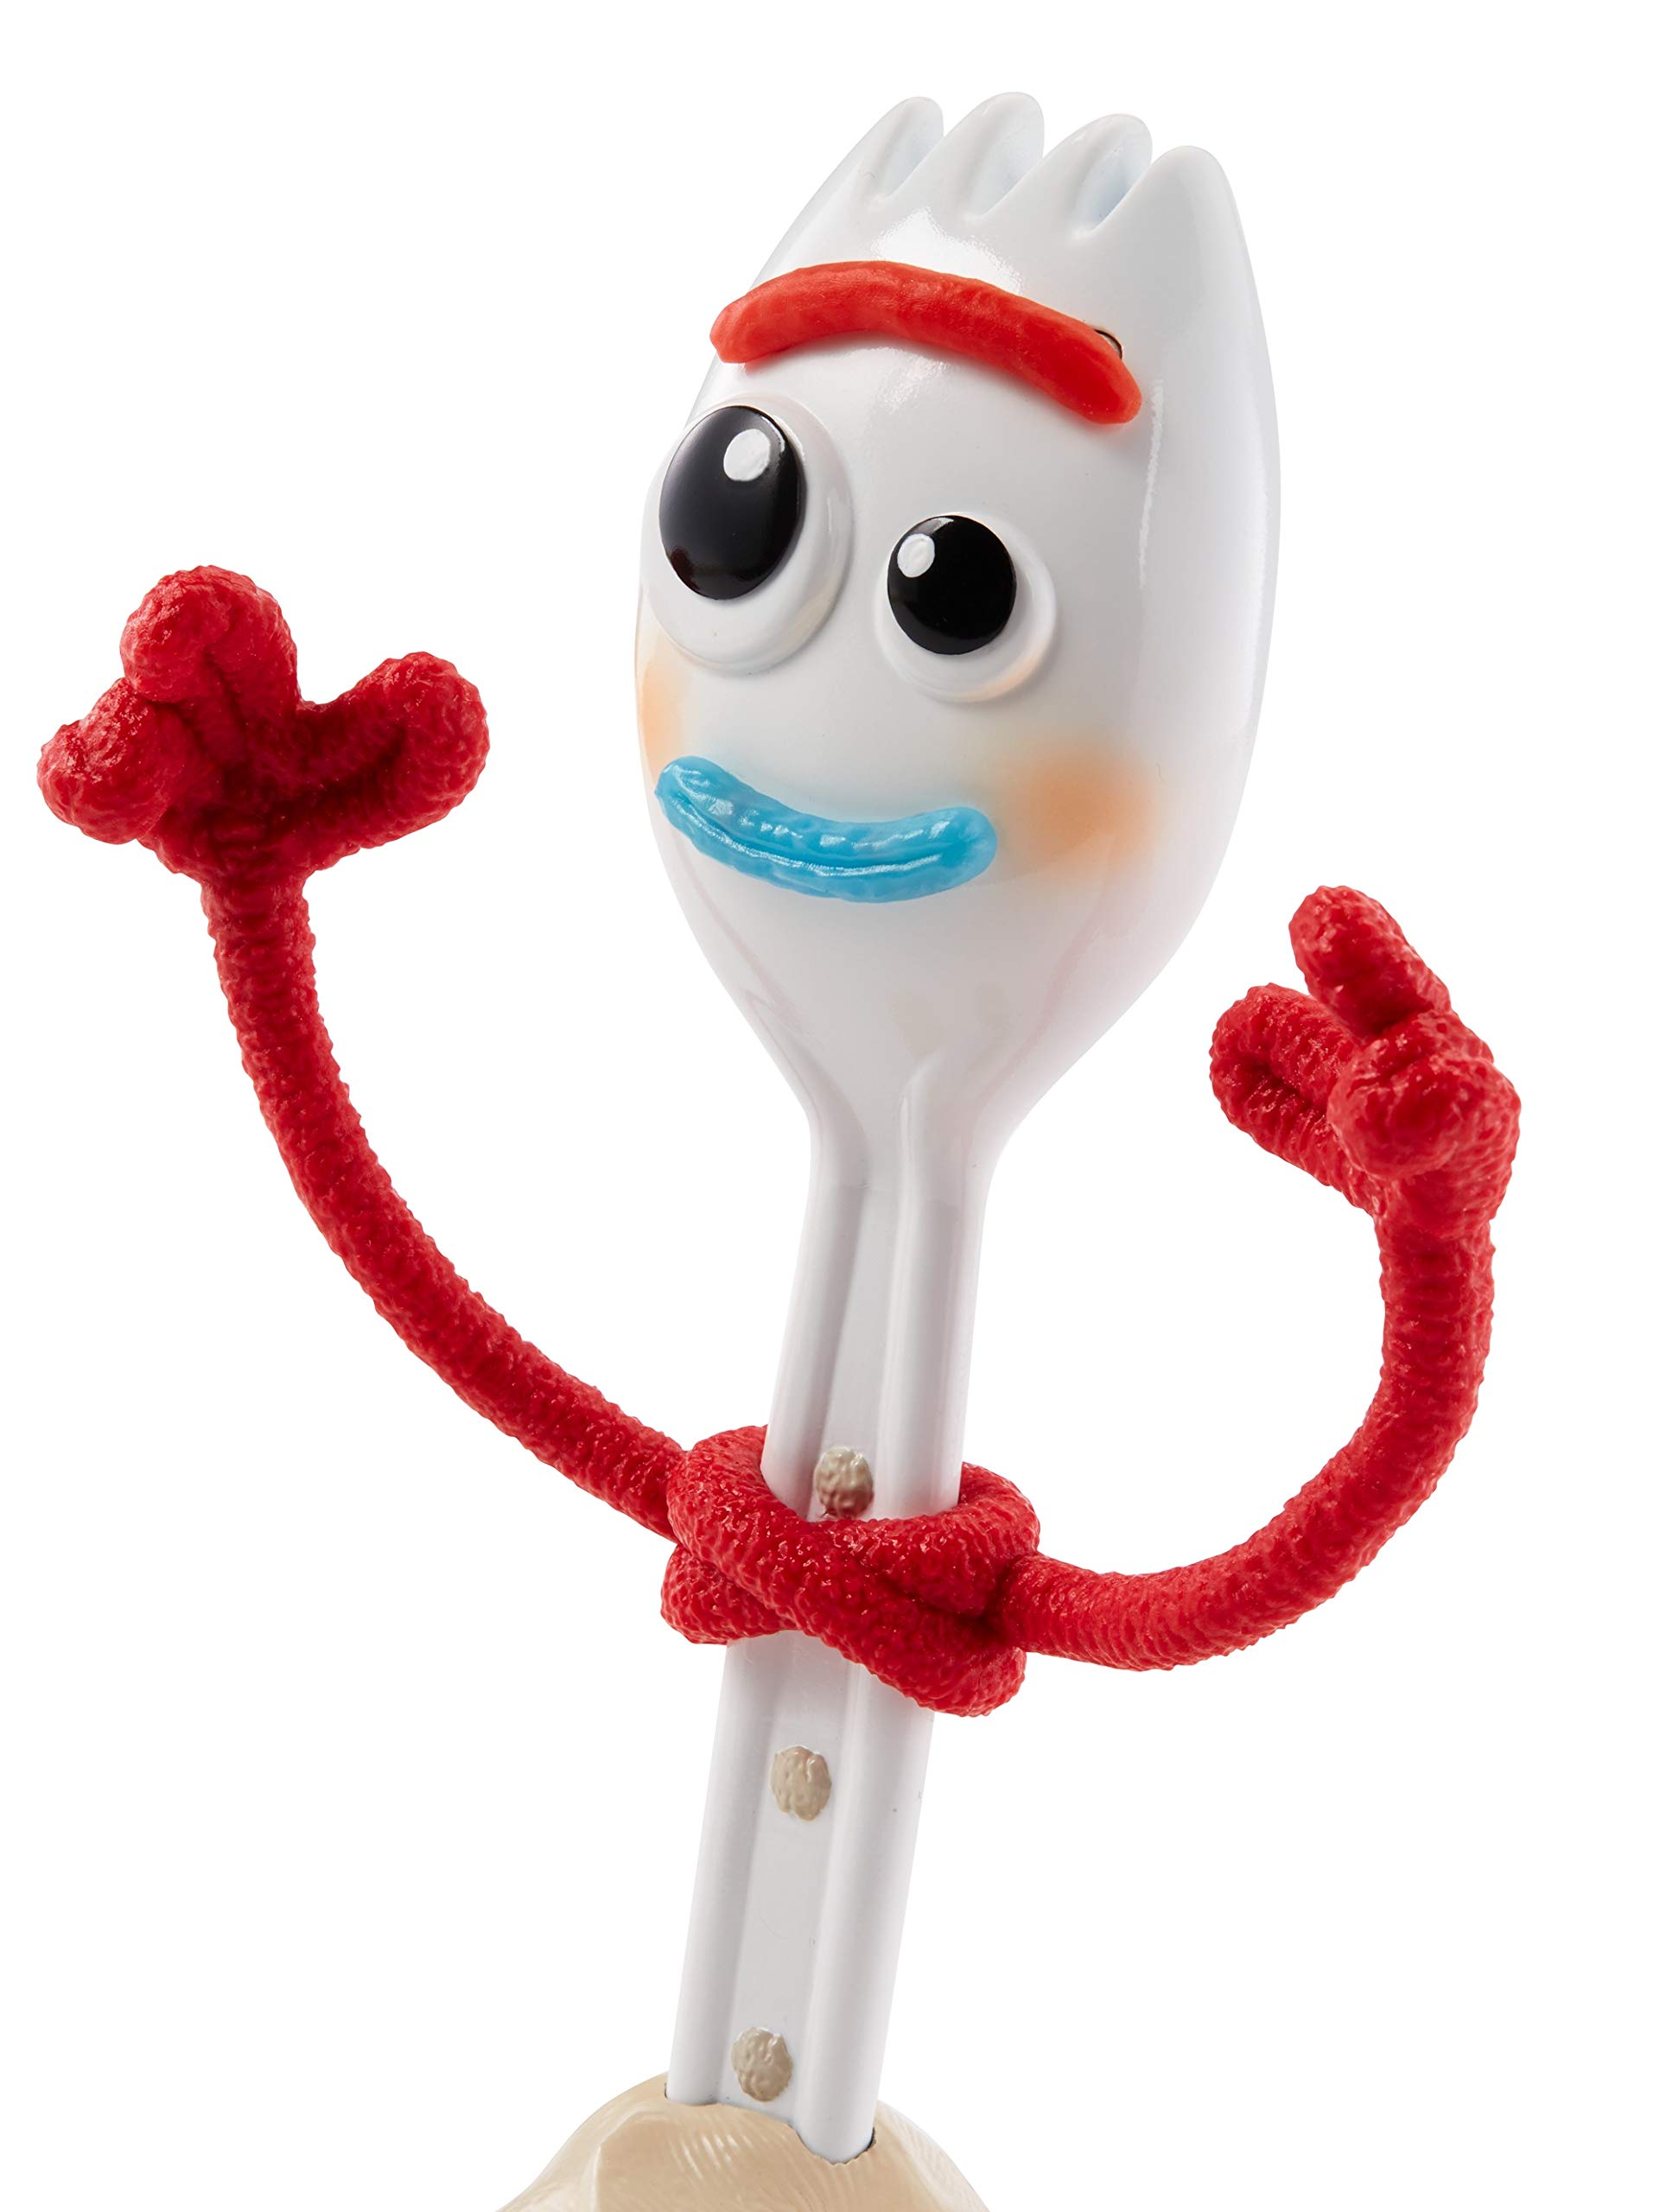 Toy Story 4Toy Story 4 True Talkers Forky Figure, 7.2 in, Posable, Talking Character Figure with Authentic Movie-Inspired Look and 15+ Phrases, Gift for Kids 3 Years and Older​